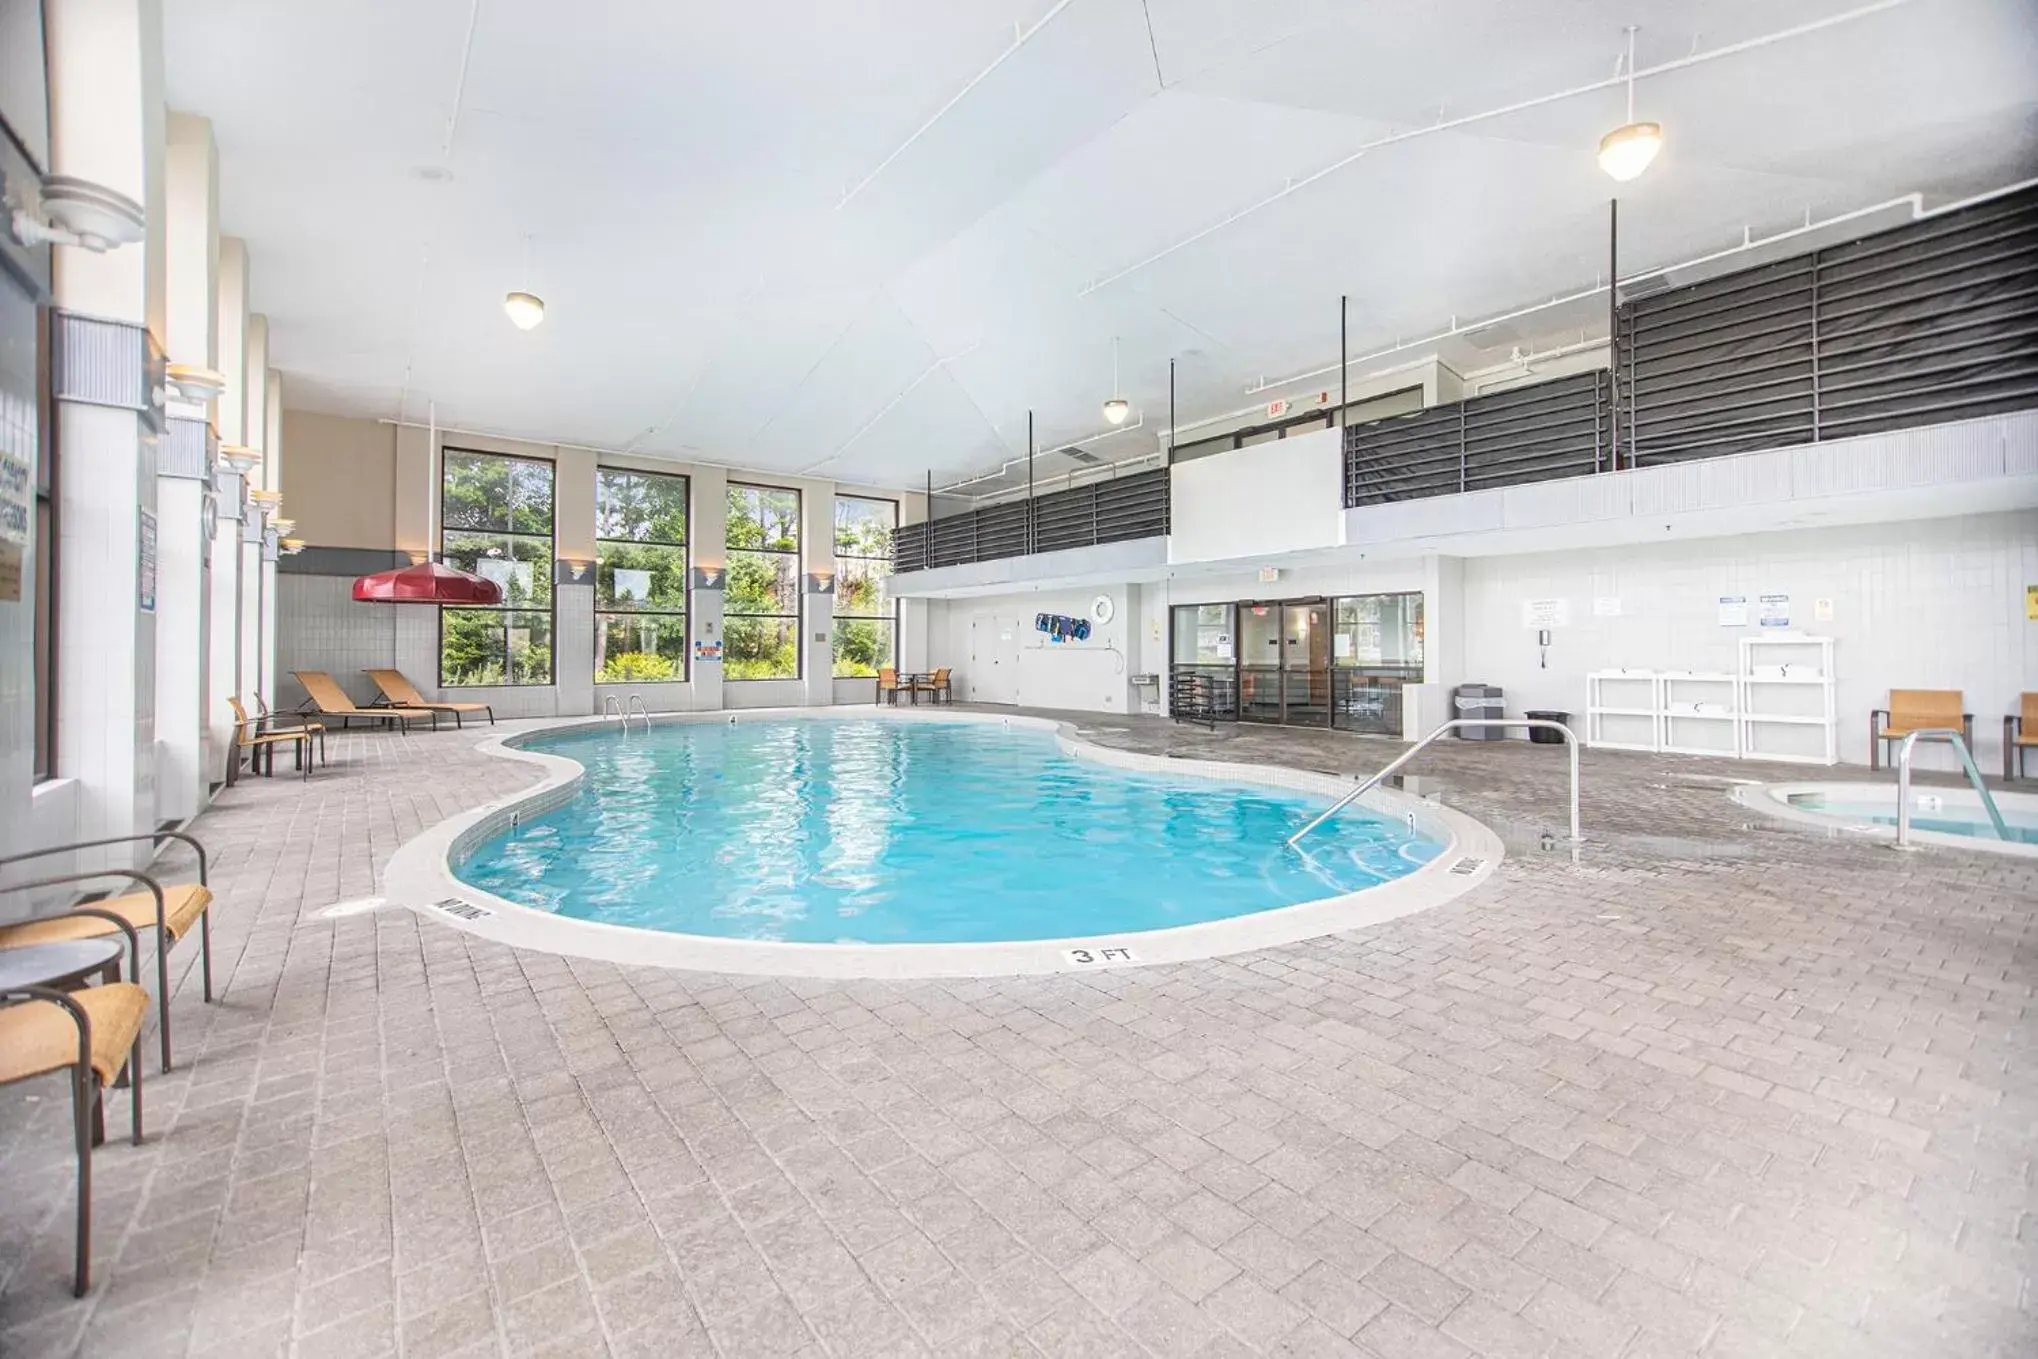 Swimming Pool in Baymont by Wyndham Grand Haven